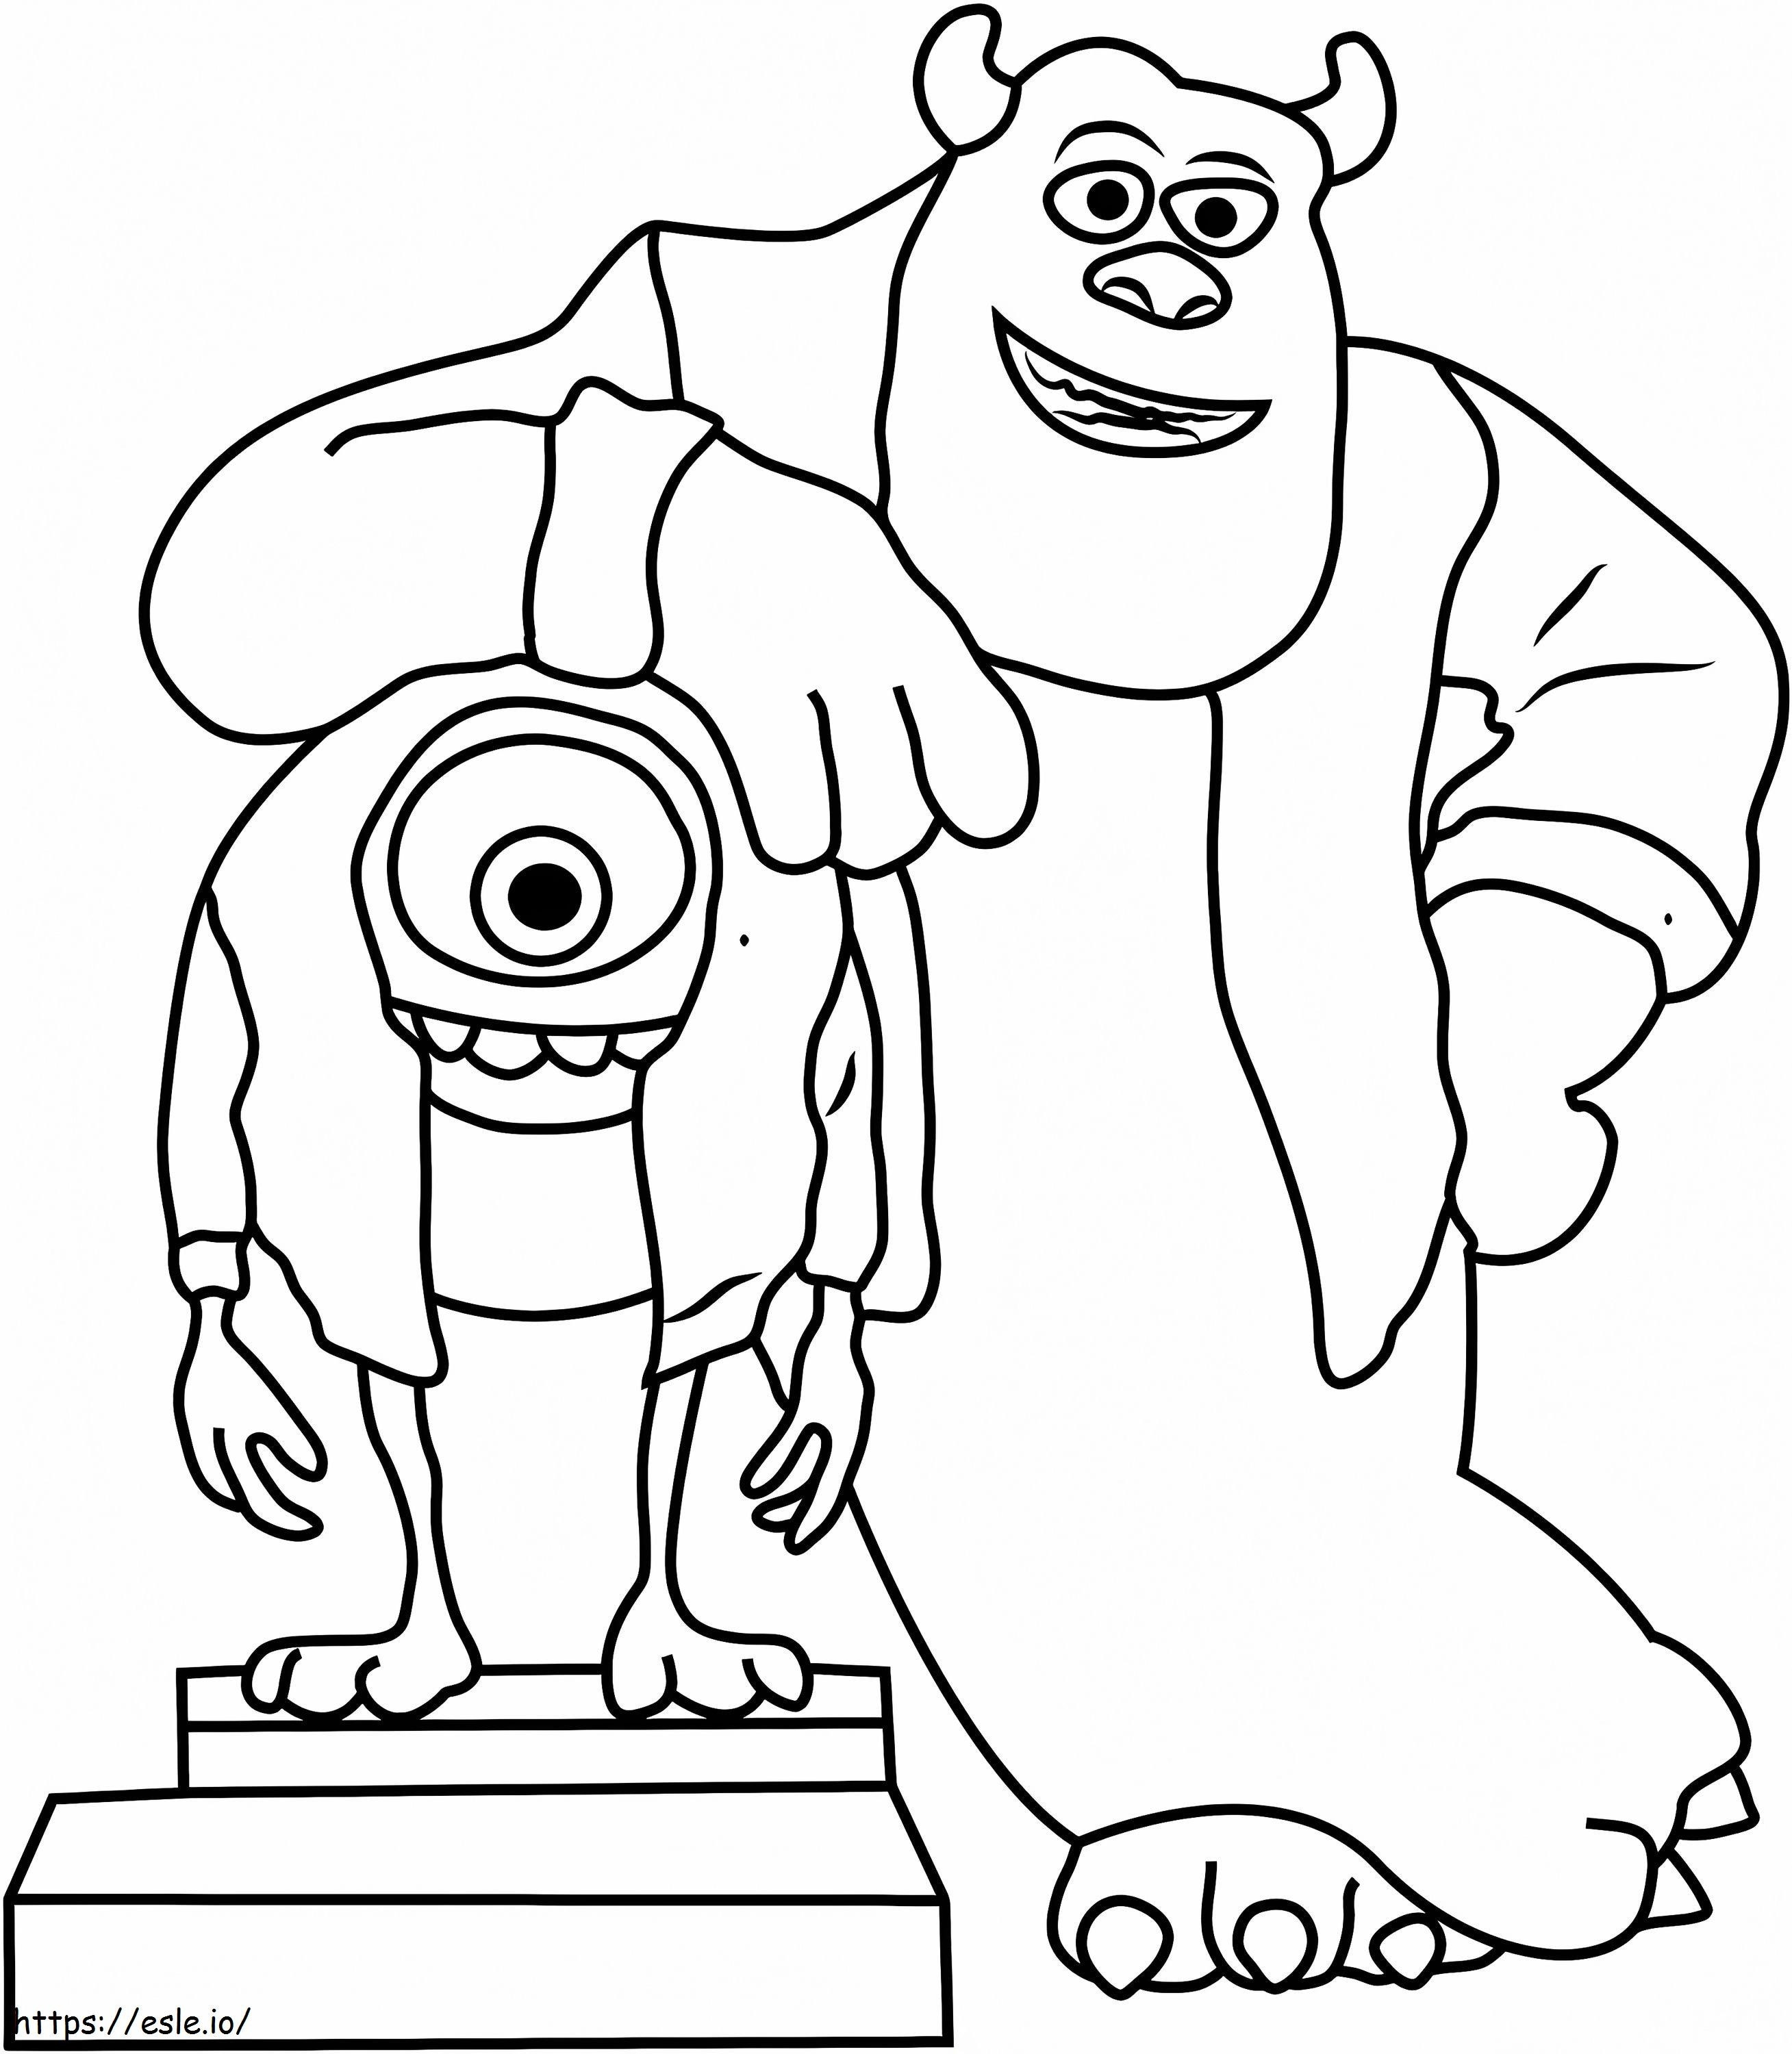 Monsters Inc Coloring Page - monsters inc sulley